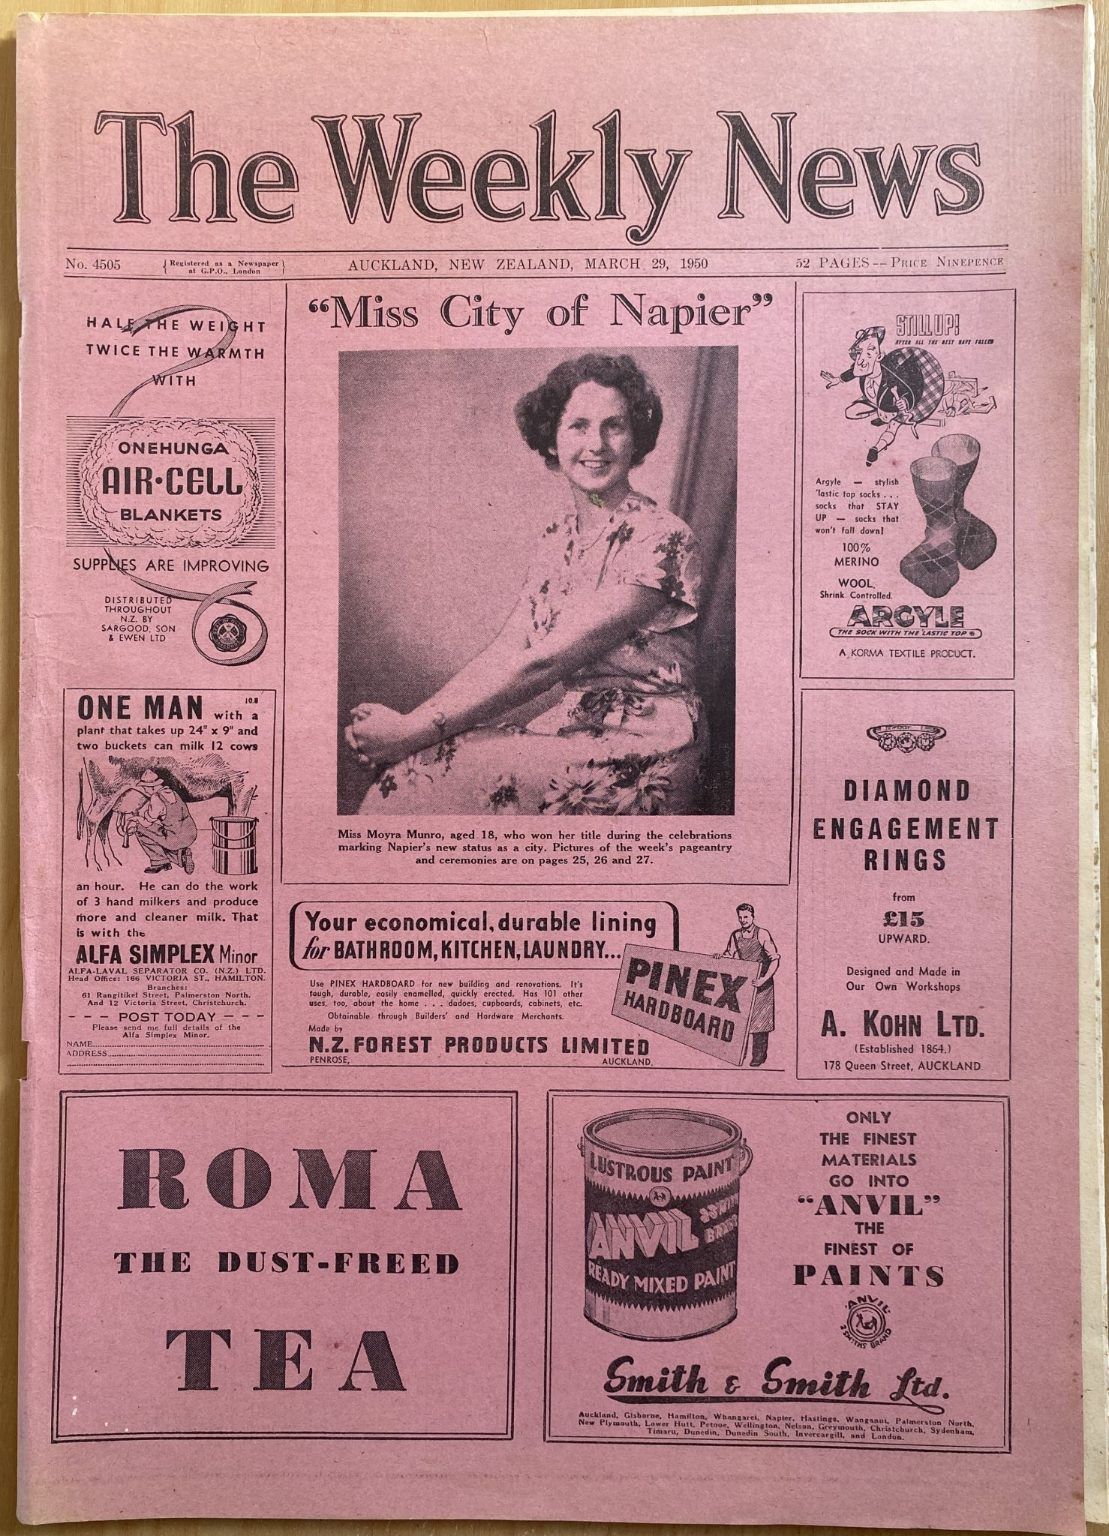 OLD NEWSPAPER: The Weekly News, No. 4505, 29 March 1950